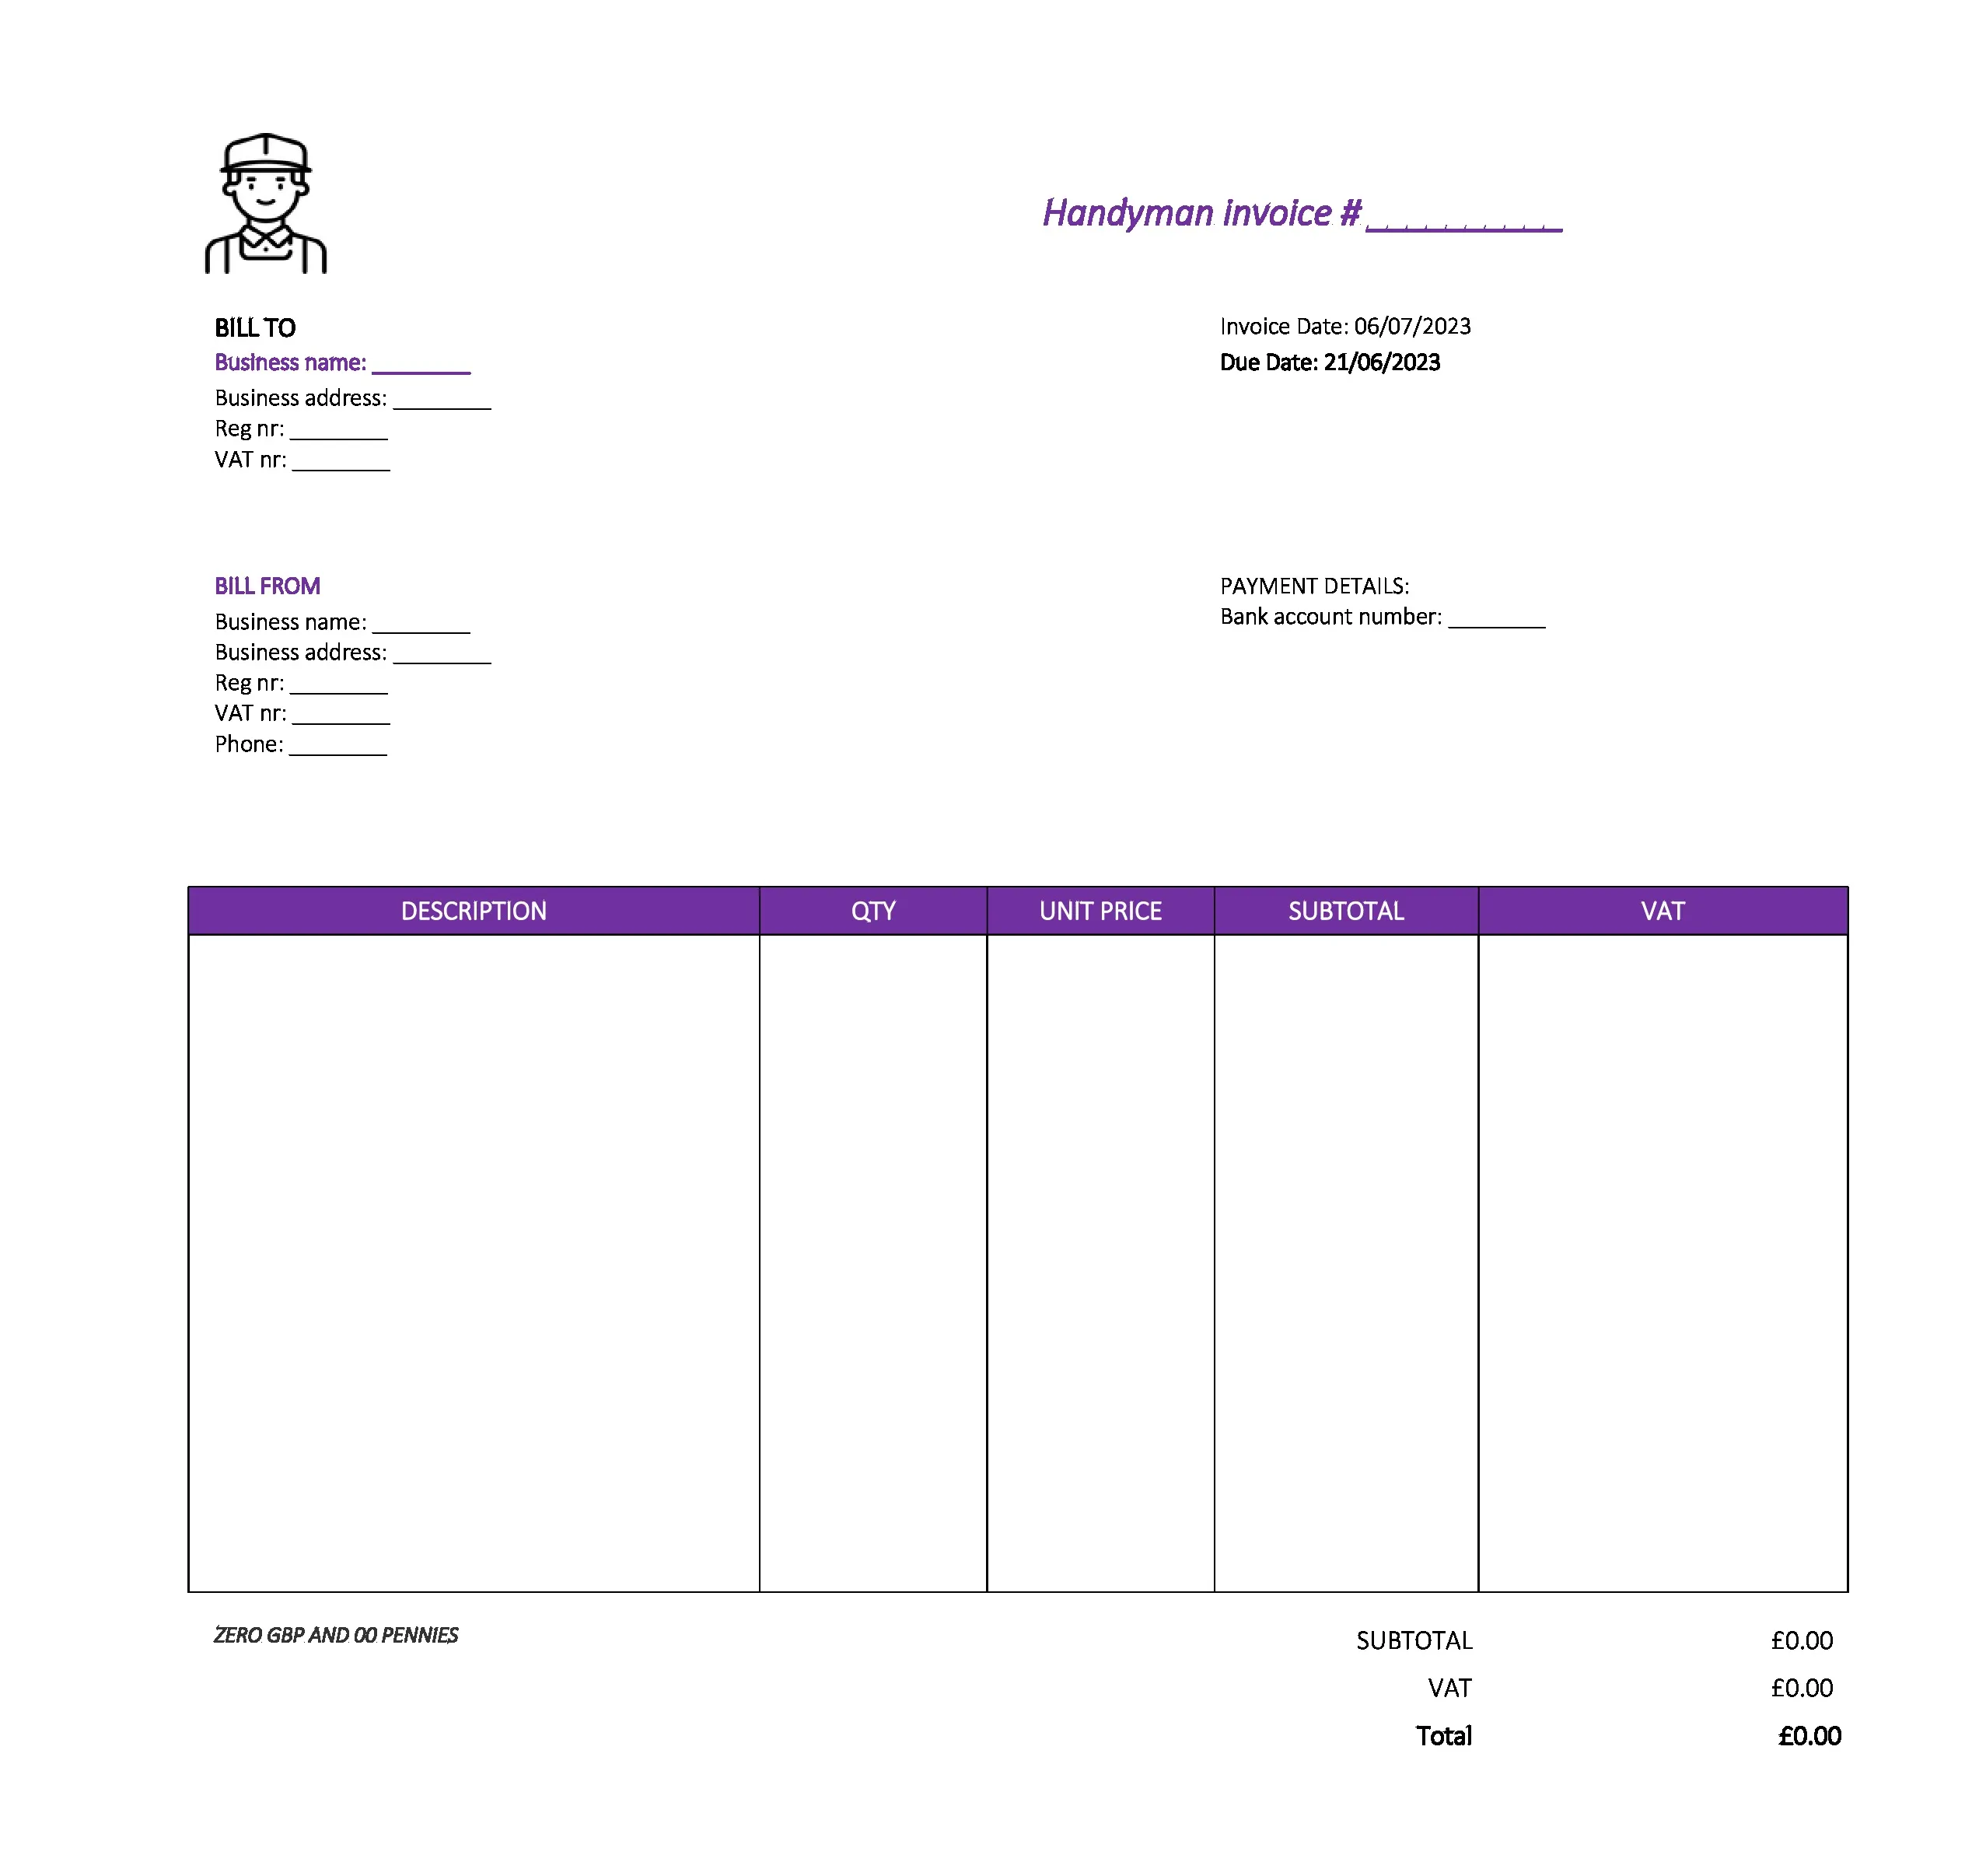 cool handyman invoice template UK Excel / Google sheets